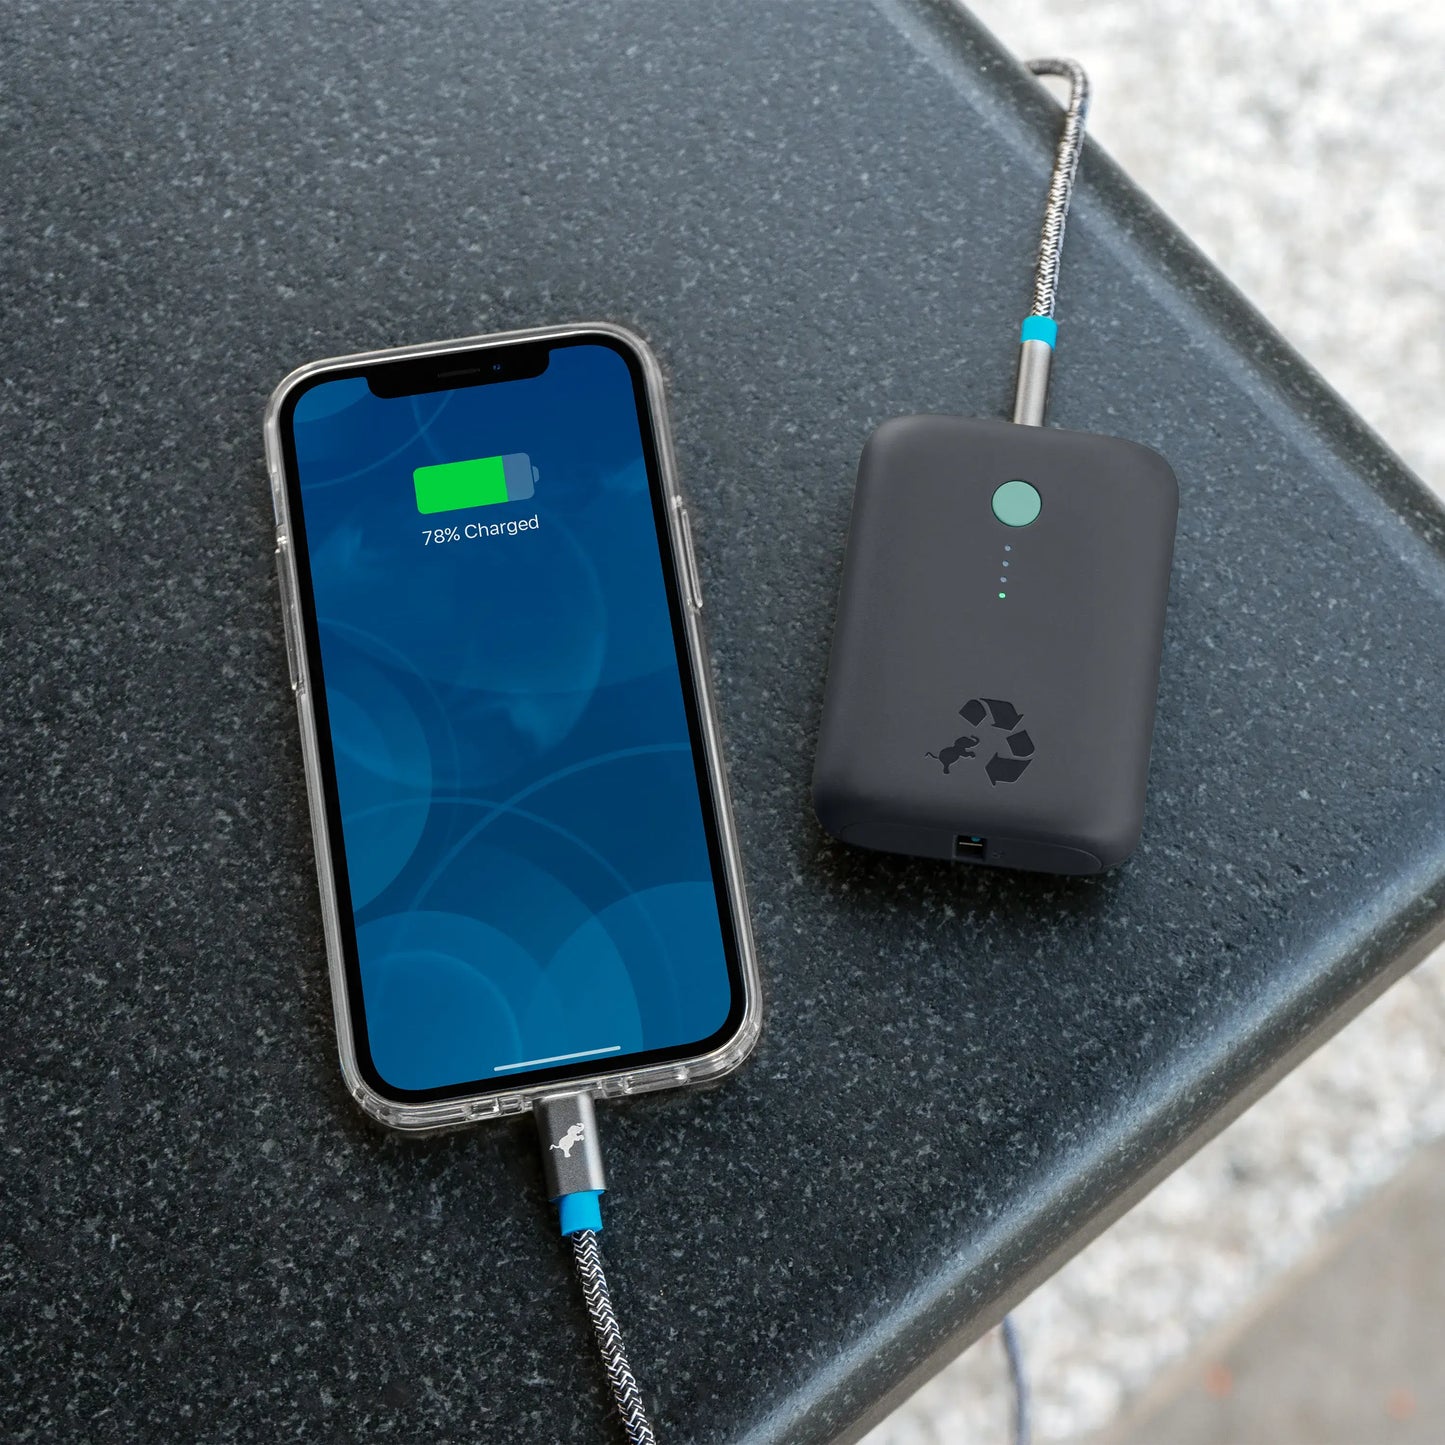 Charcoal portable charger with green button connected to cell phone on countertop.